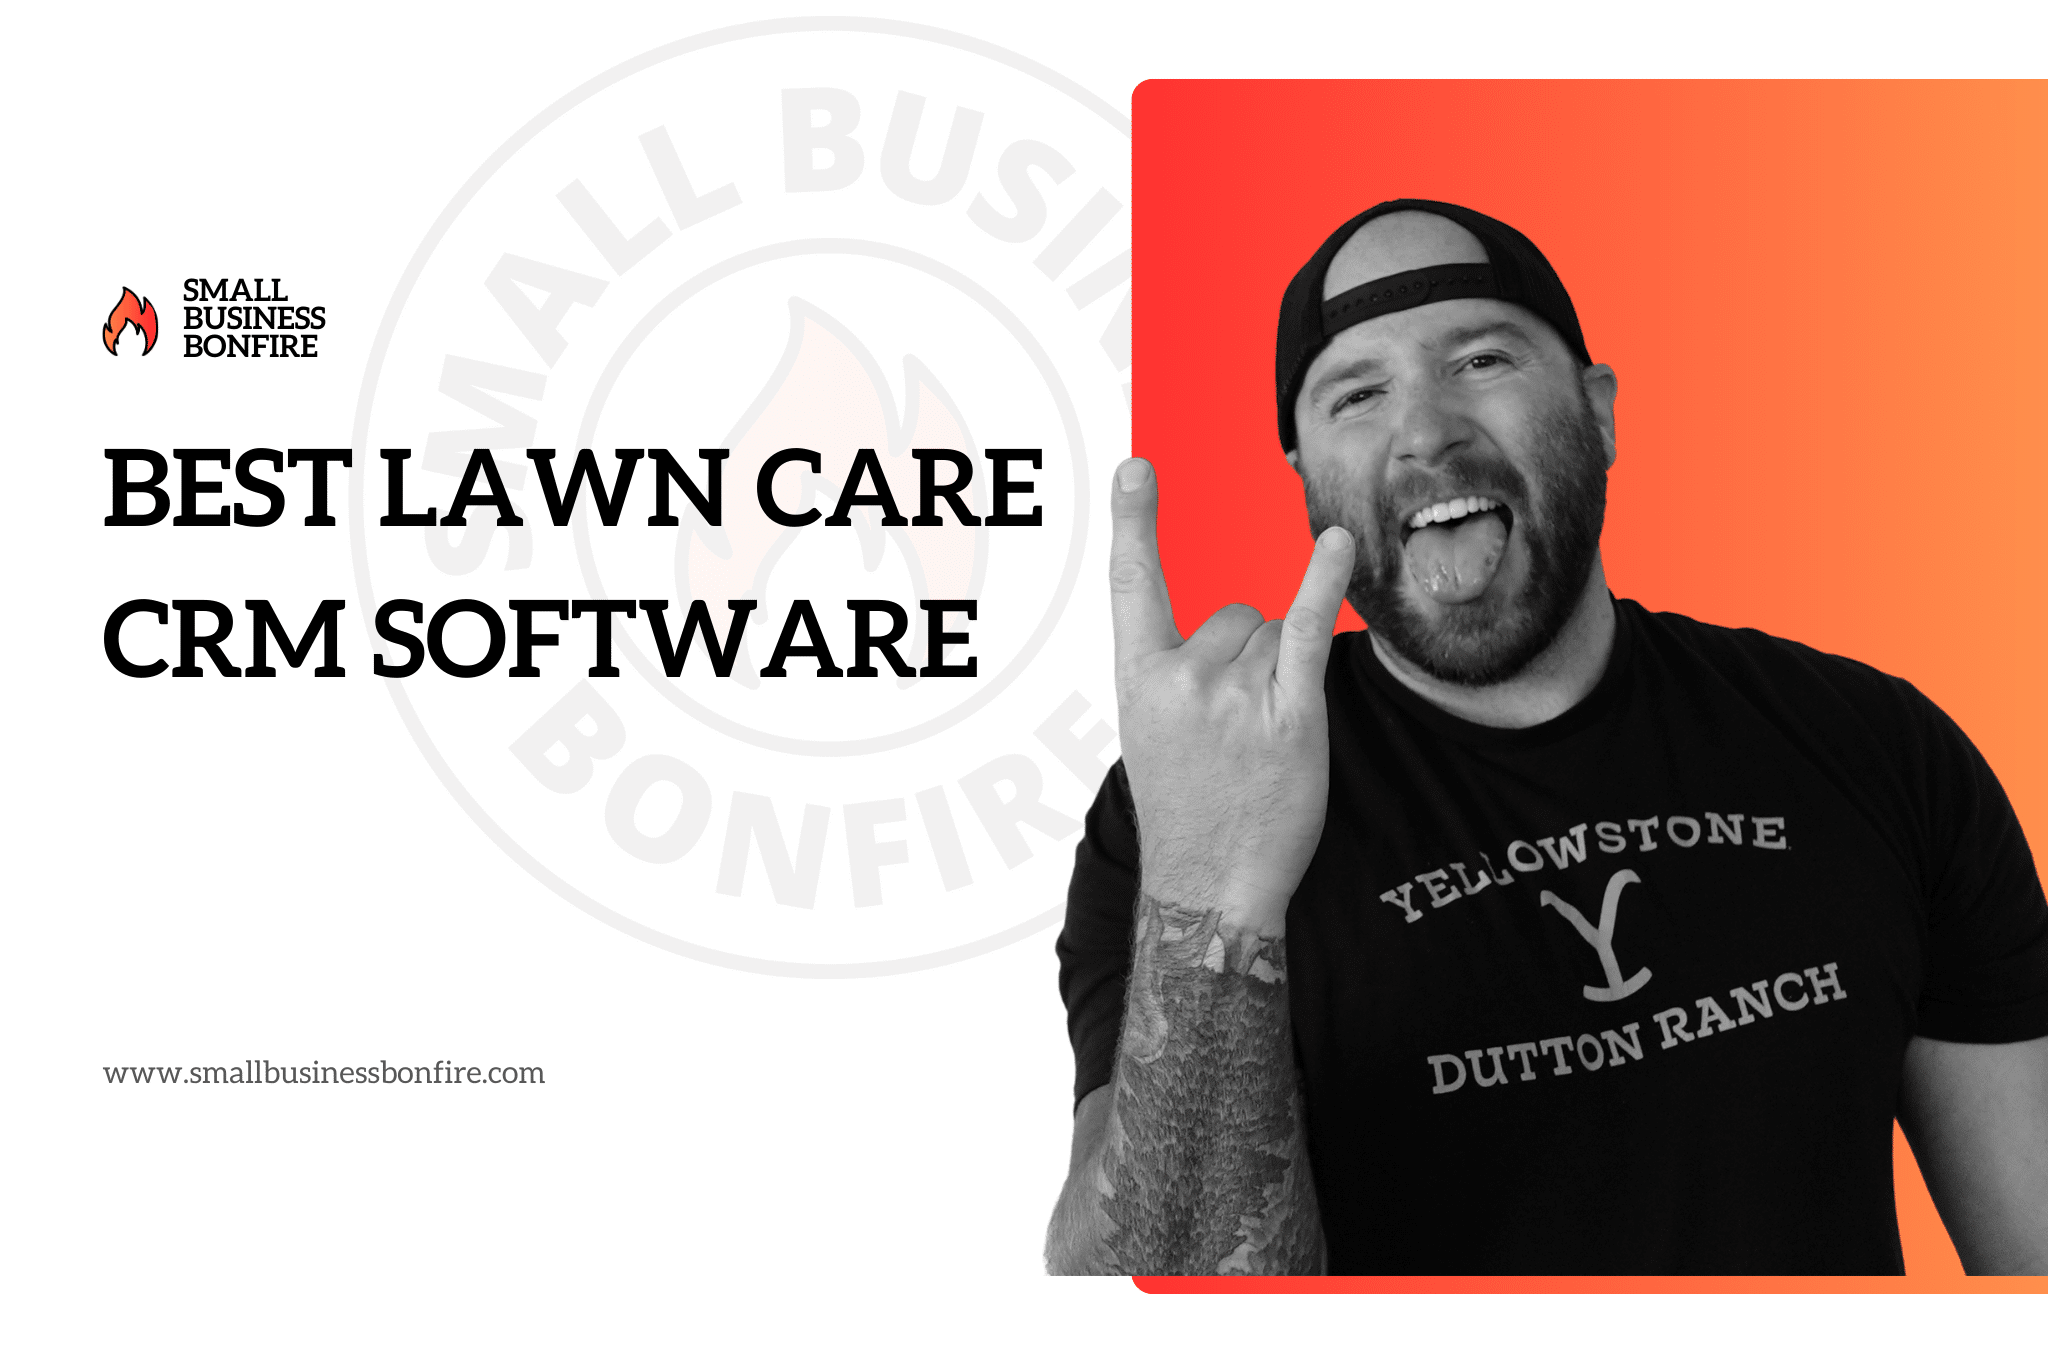 Best Lawn Care CRM Software - Hero Image